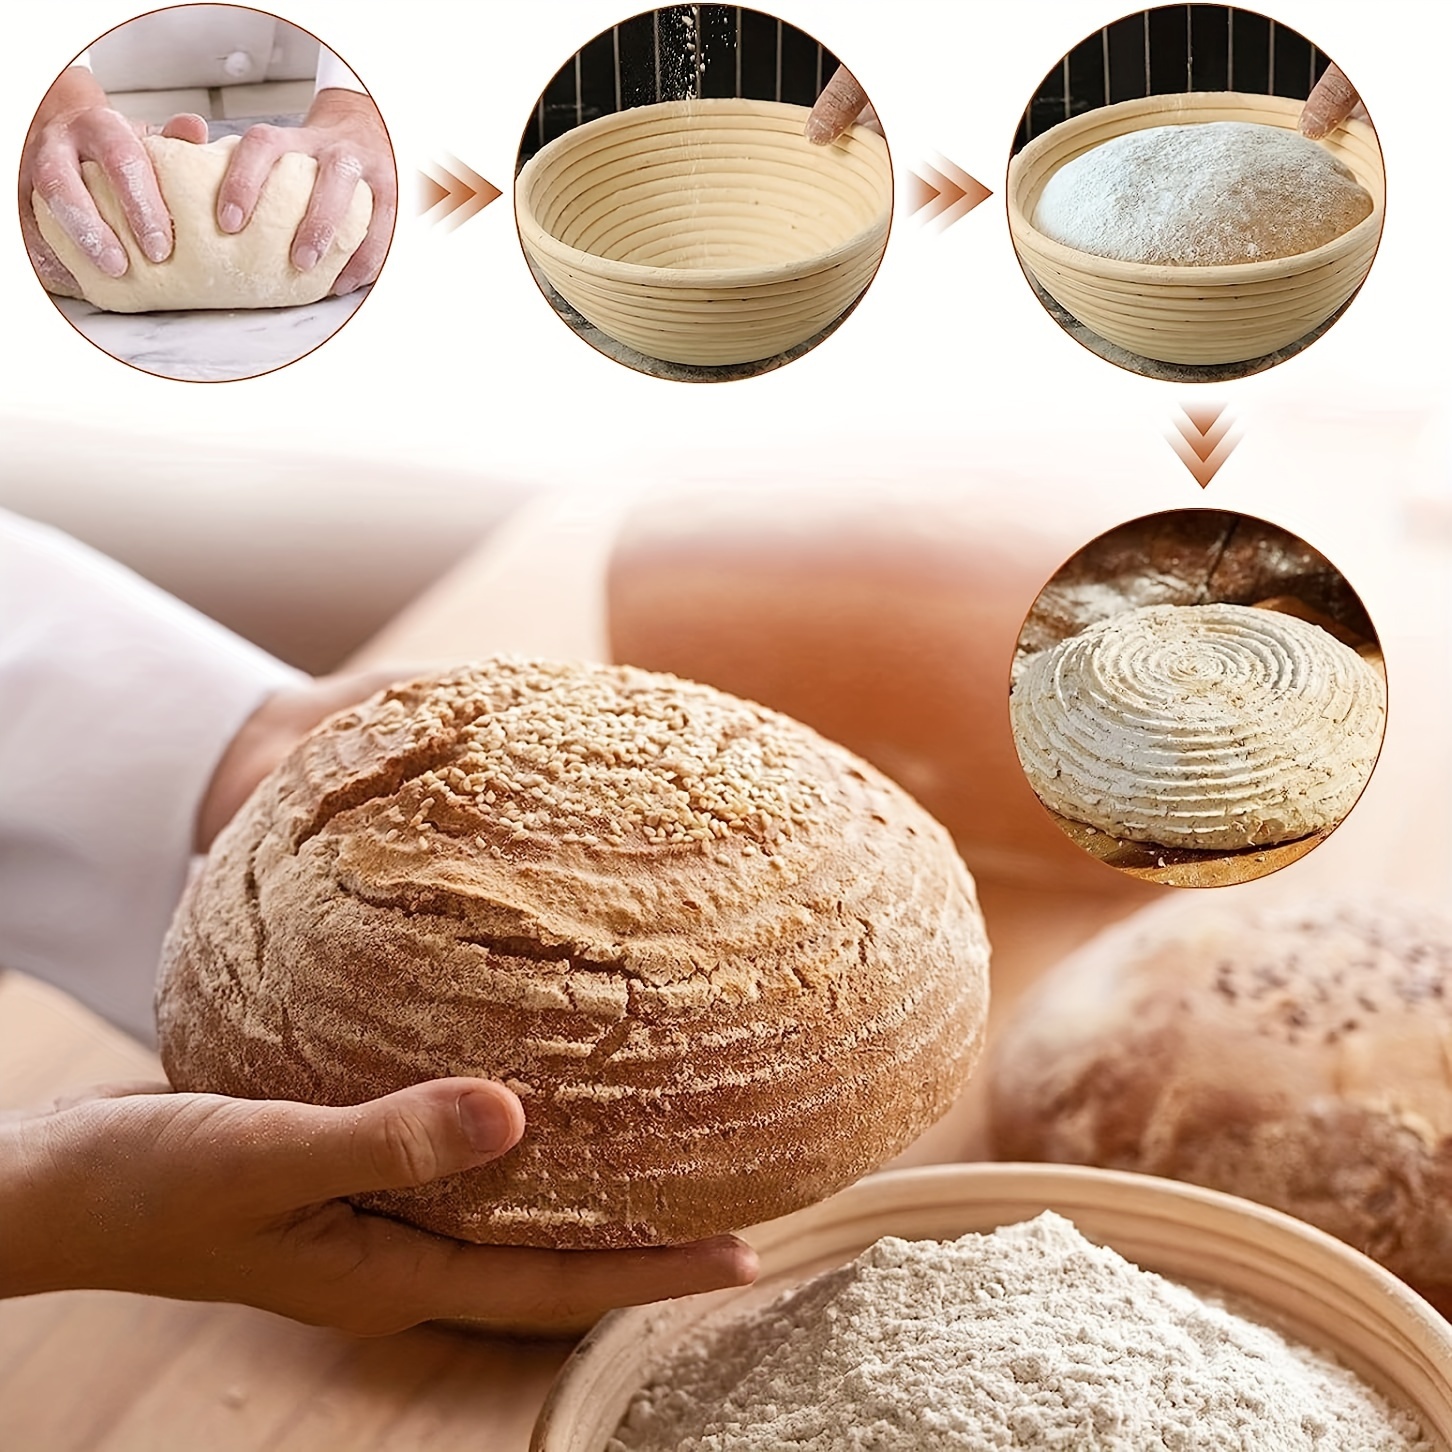  Bread Proofing Baskets - Silicone / Bread Proofing